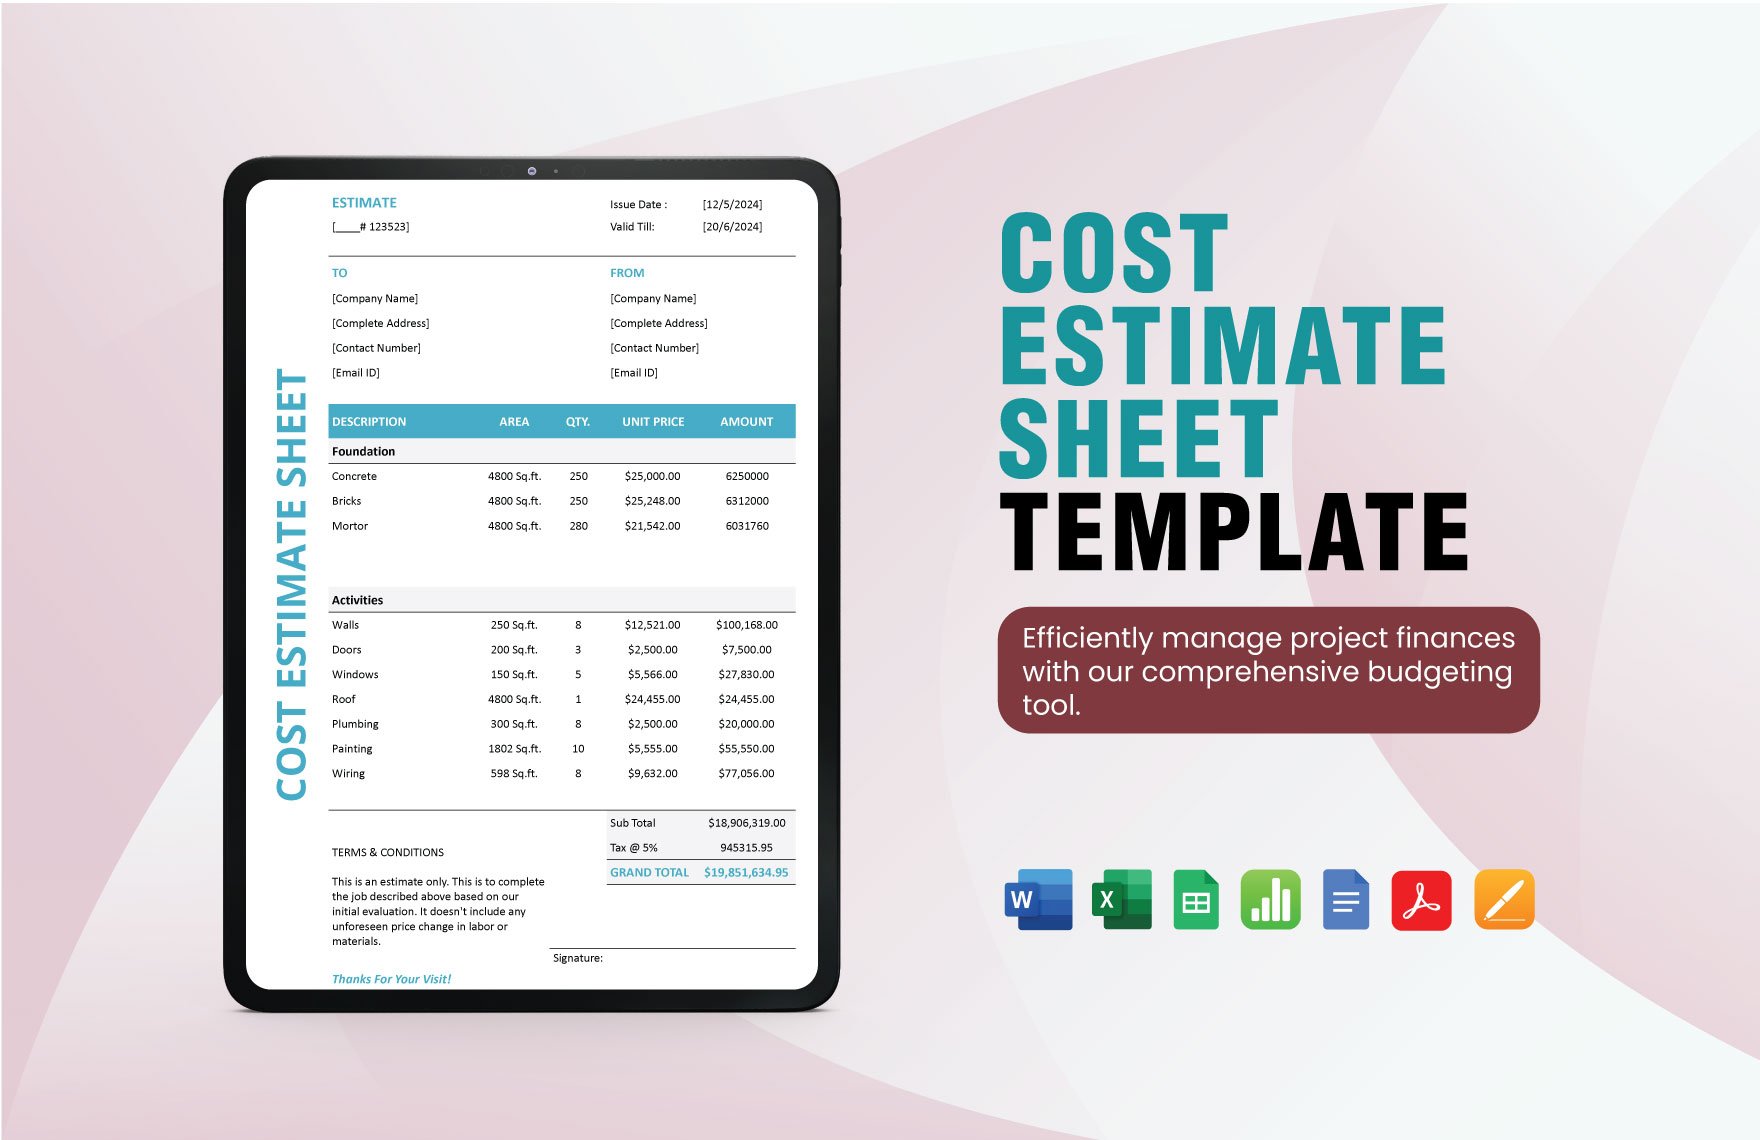 Cost Estimate Sheet Template in Word, Google Docs, Excel, PDF, Google Sheets, Apple Pages, Apple Numbers